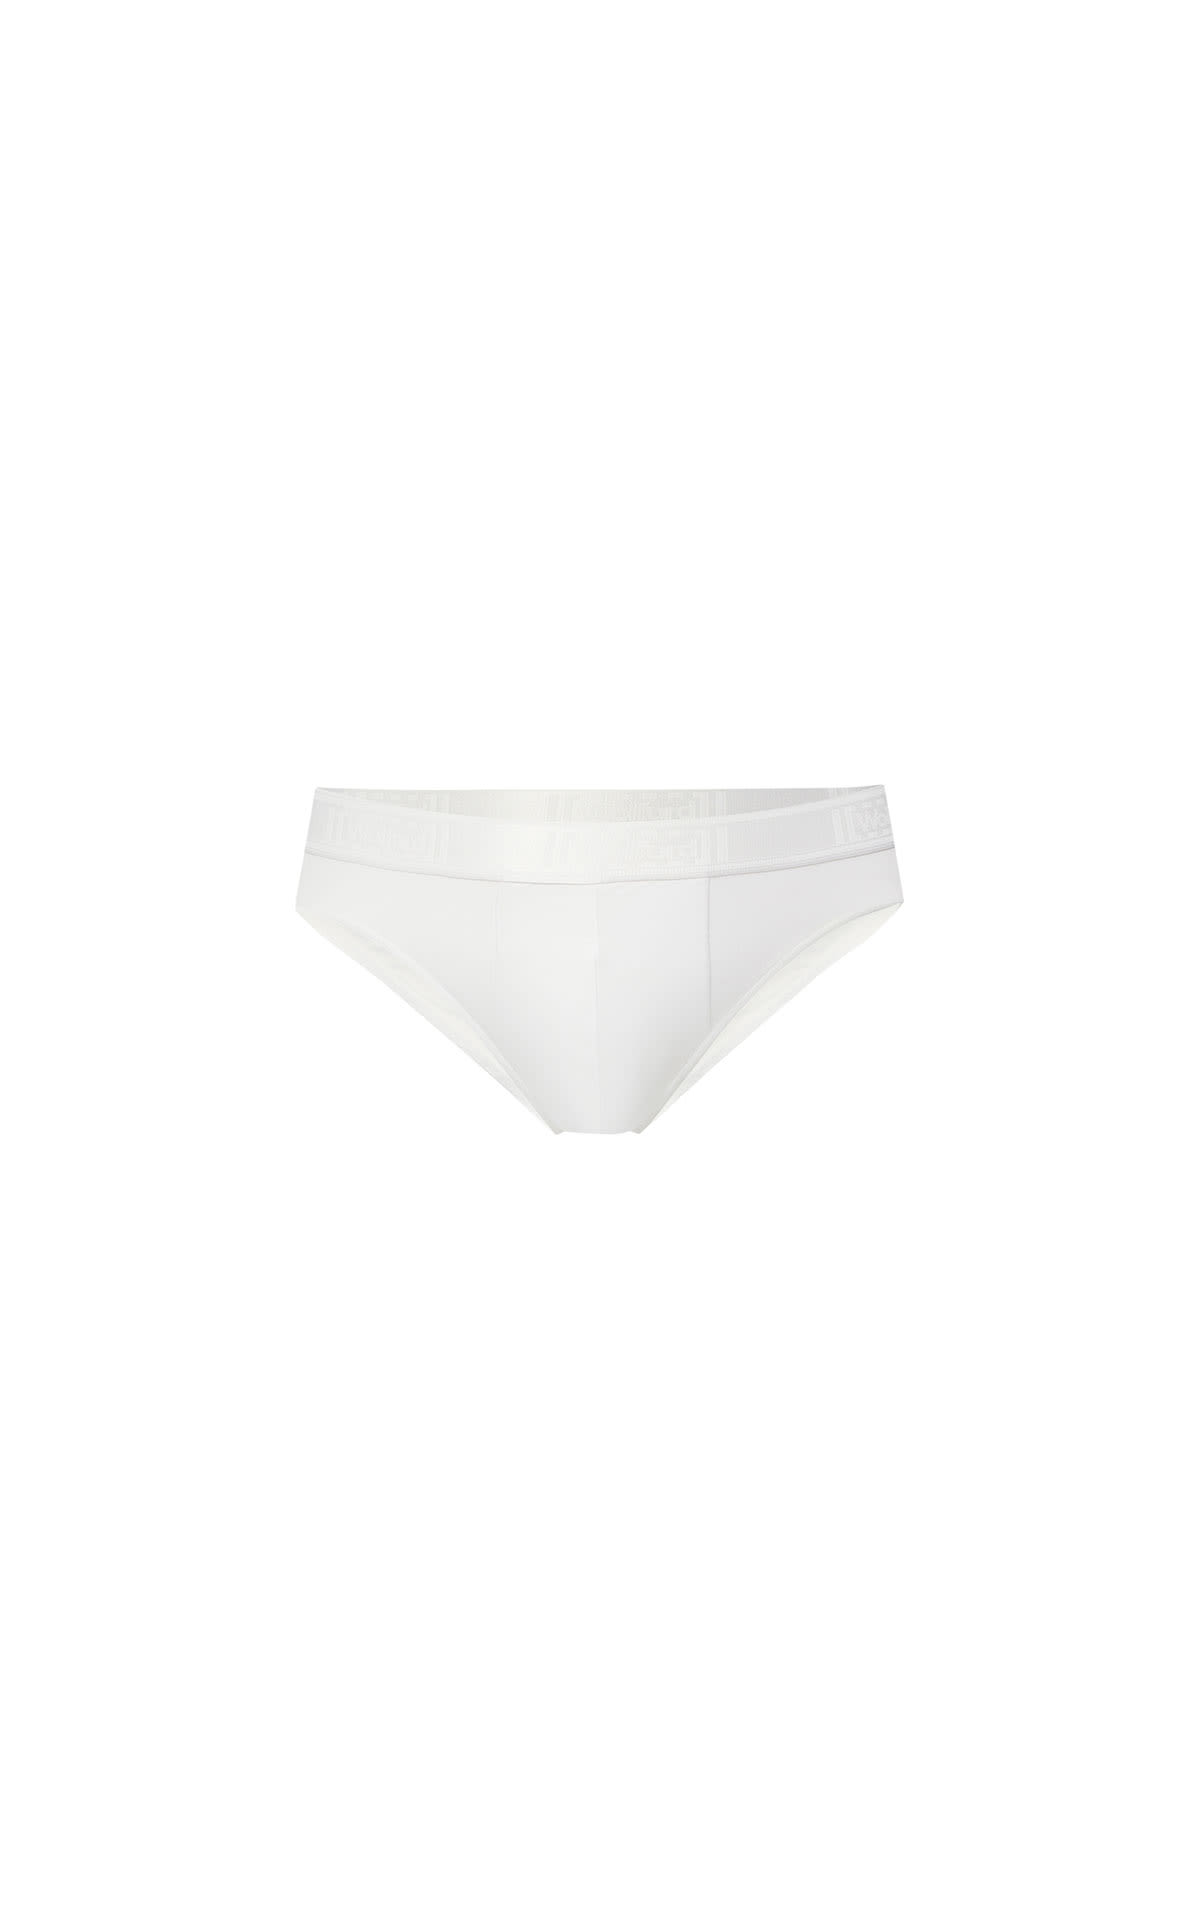 Wolford Men’s pure brief from Bicester Village